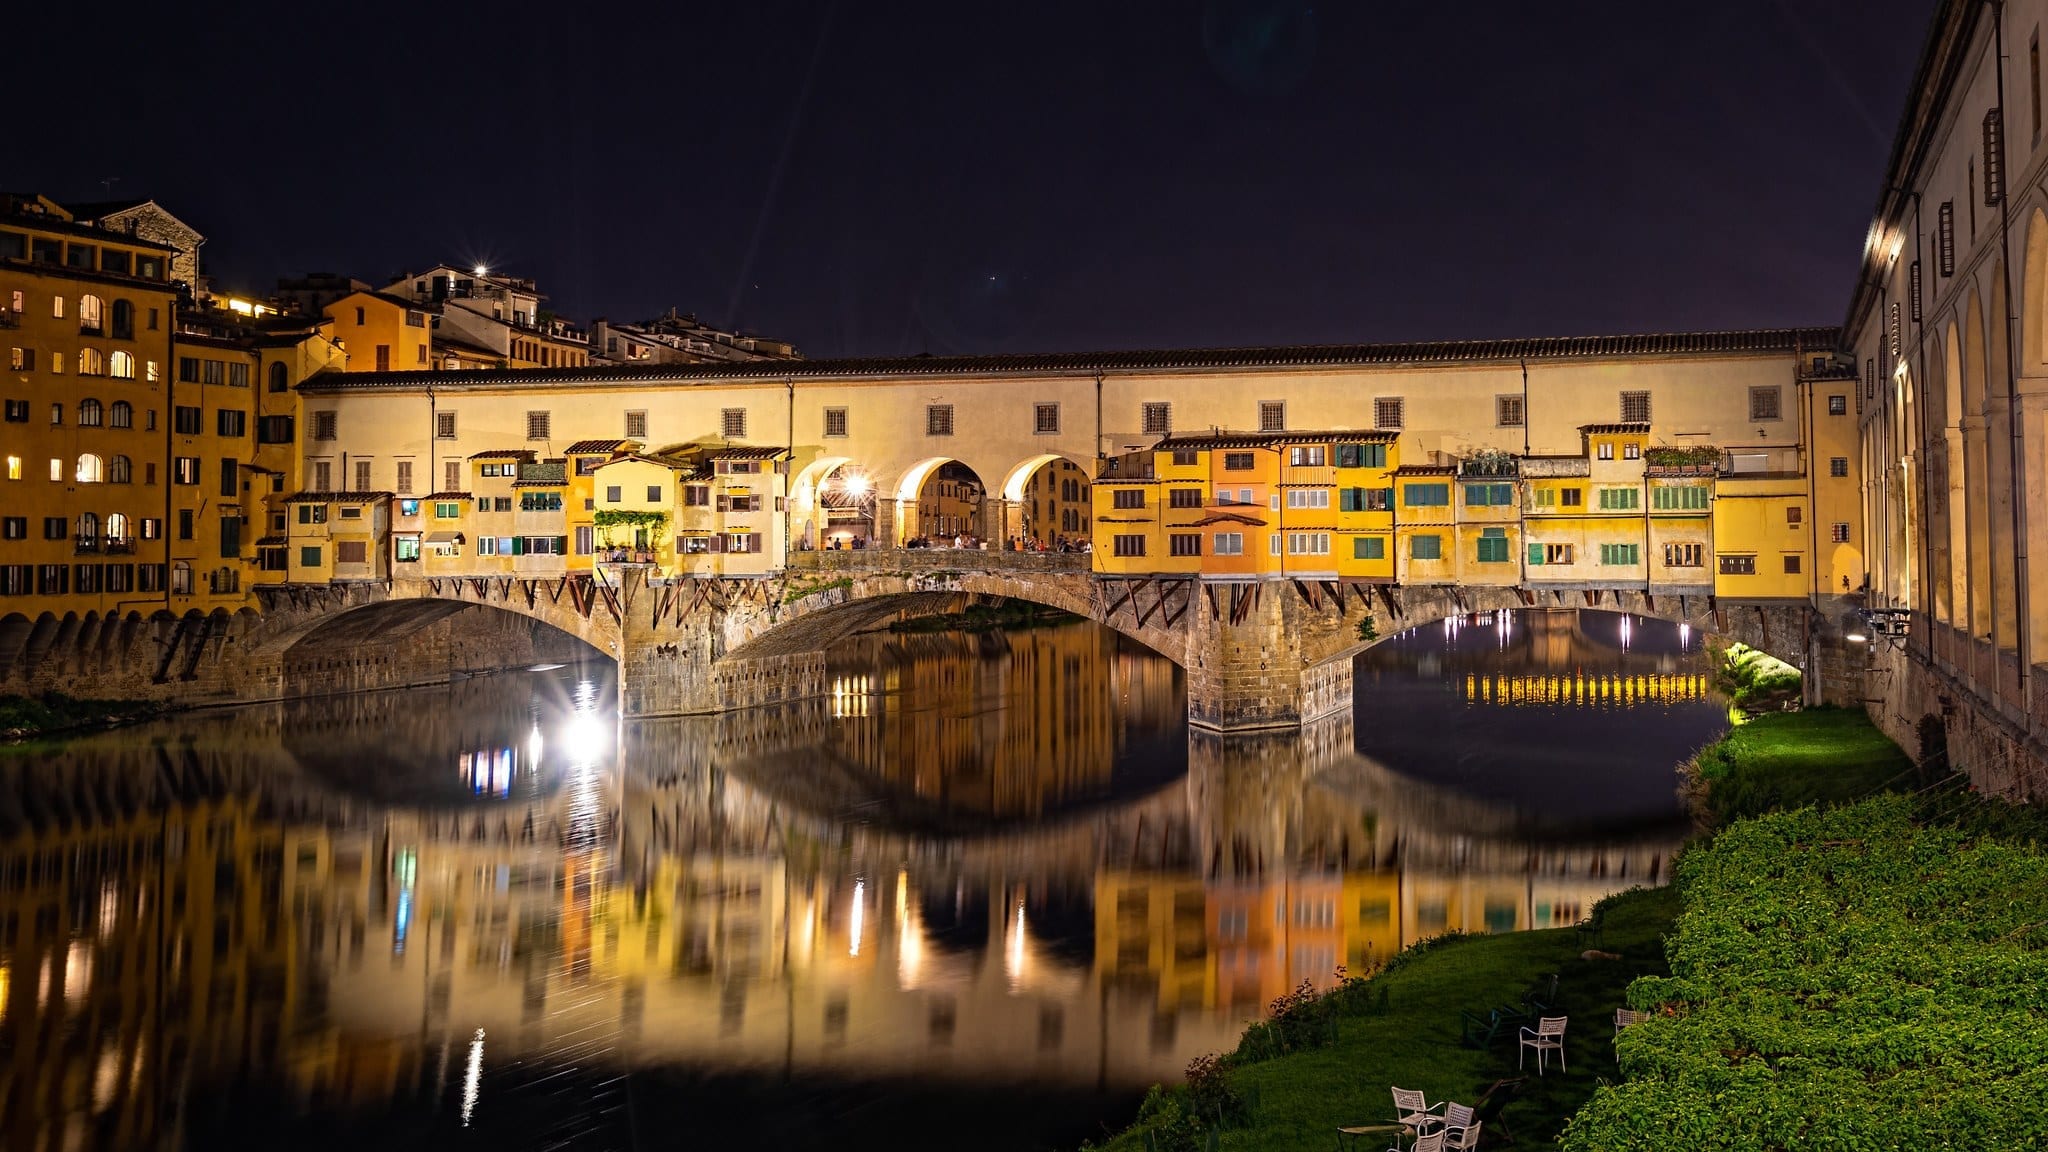 A bridge in Florence lit up at night with yellow buildings in the background, reflected into the water.